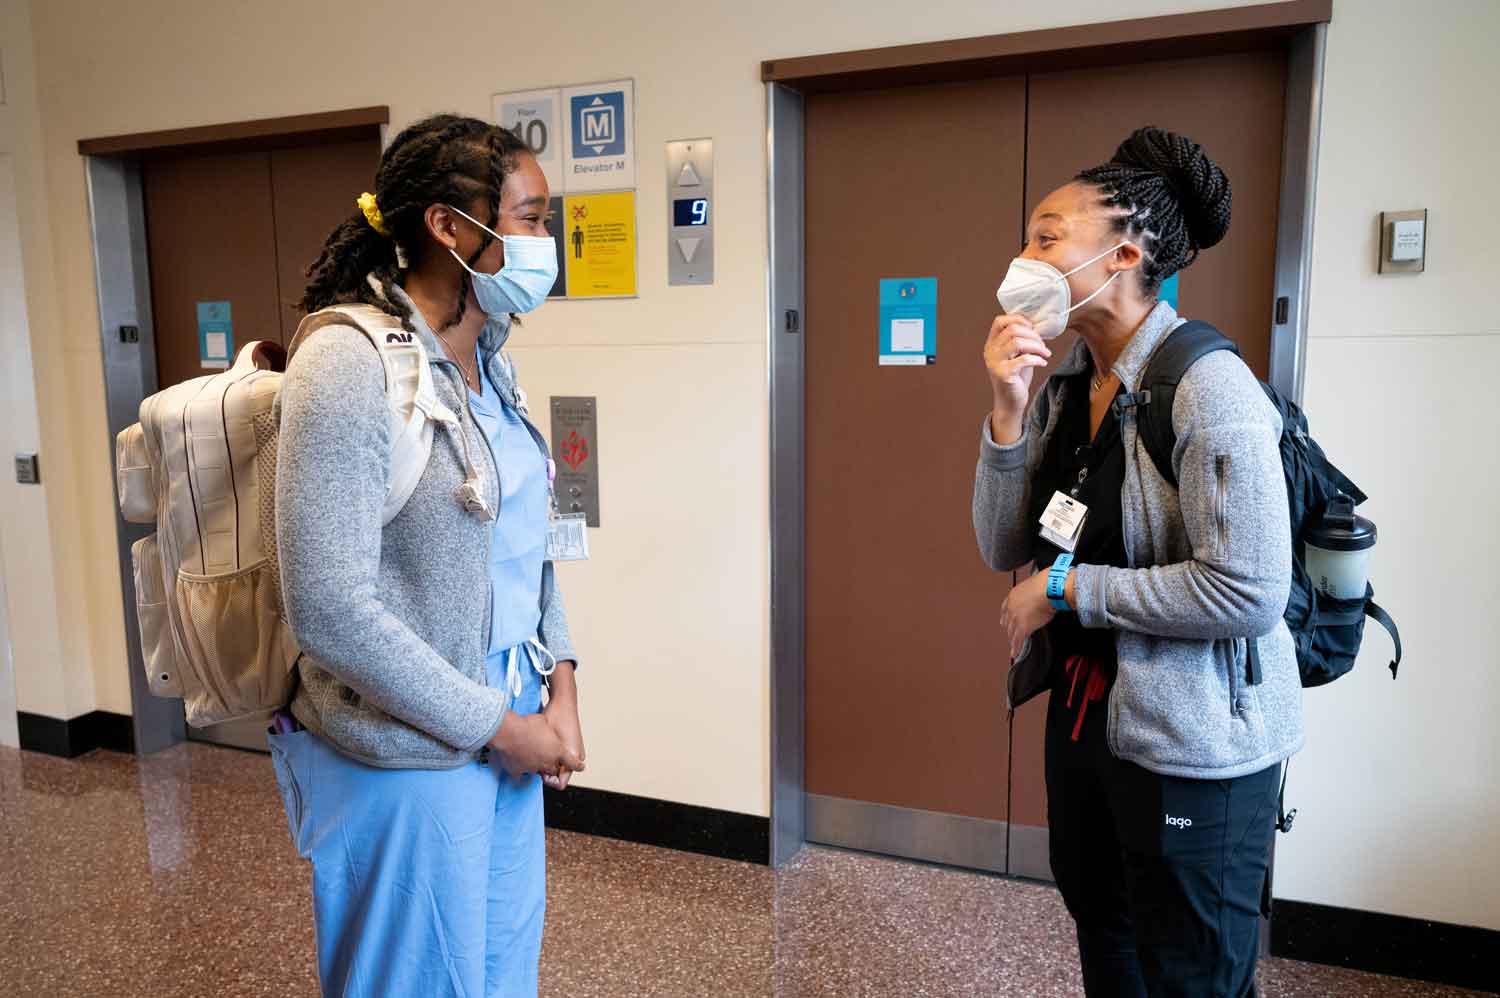 Two Black female medical residents named Jas (left) and Kelechi (right) smile as they greet each other in front of a set of elevators .They wear respiratory masks and medical scrubs.